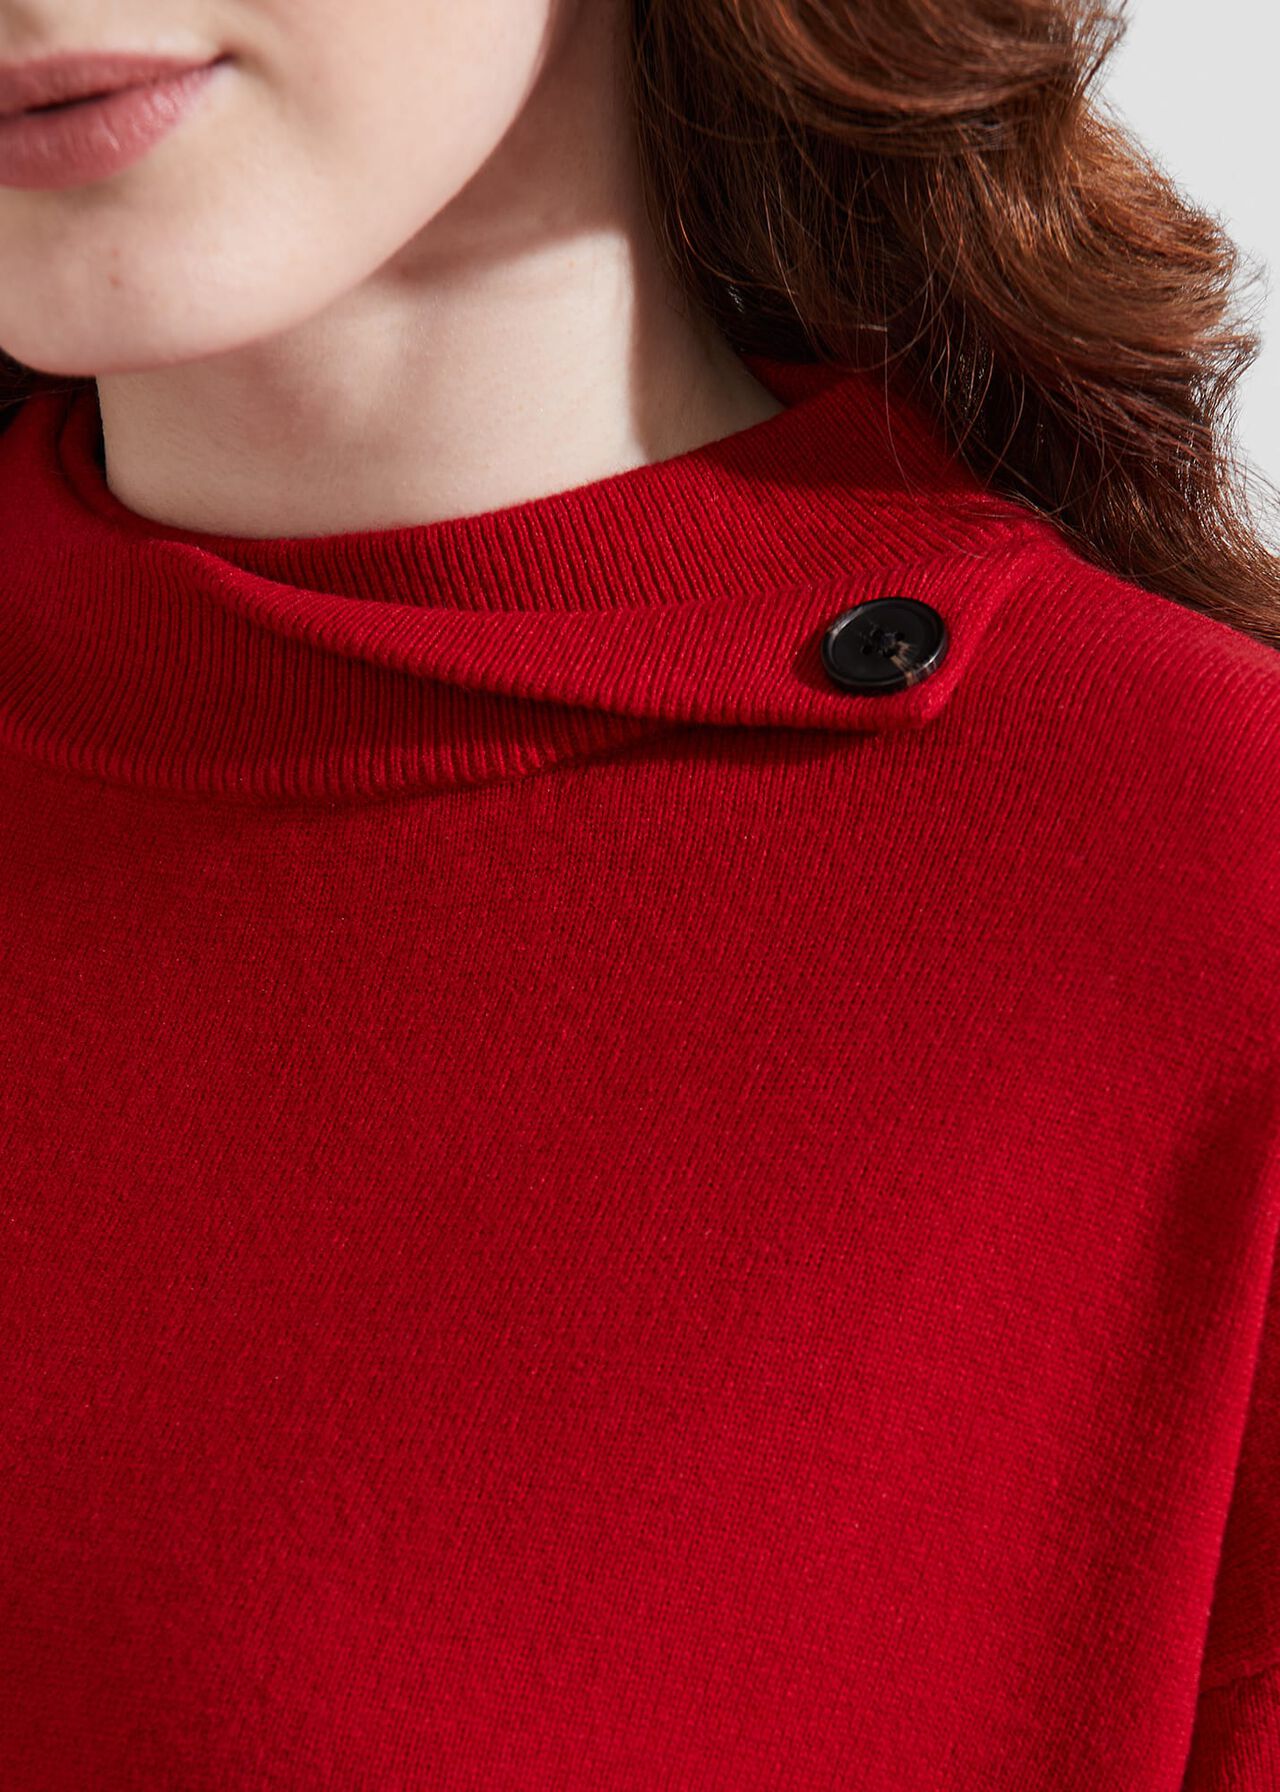 Talia Knitted Dress With Cashmere, True Red, hi-res